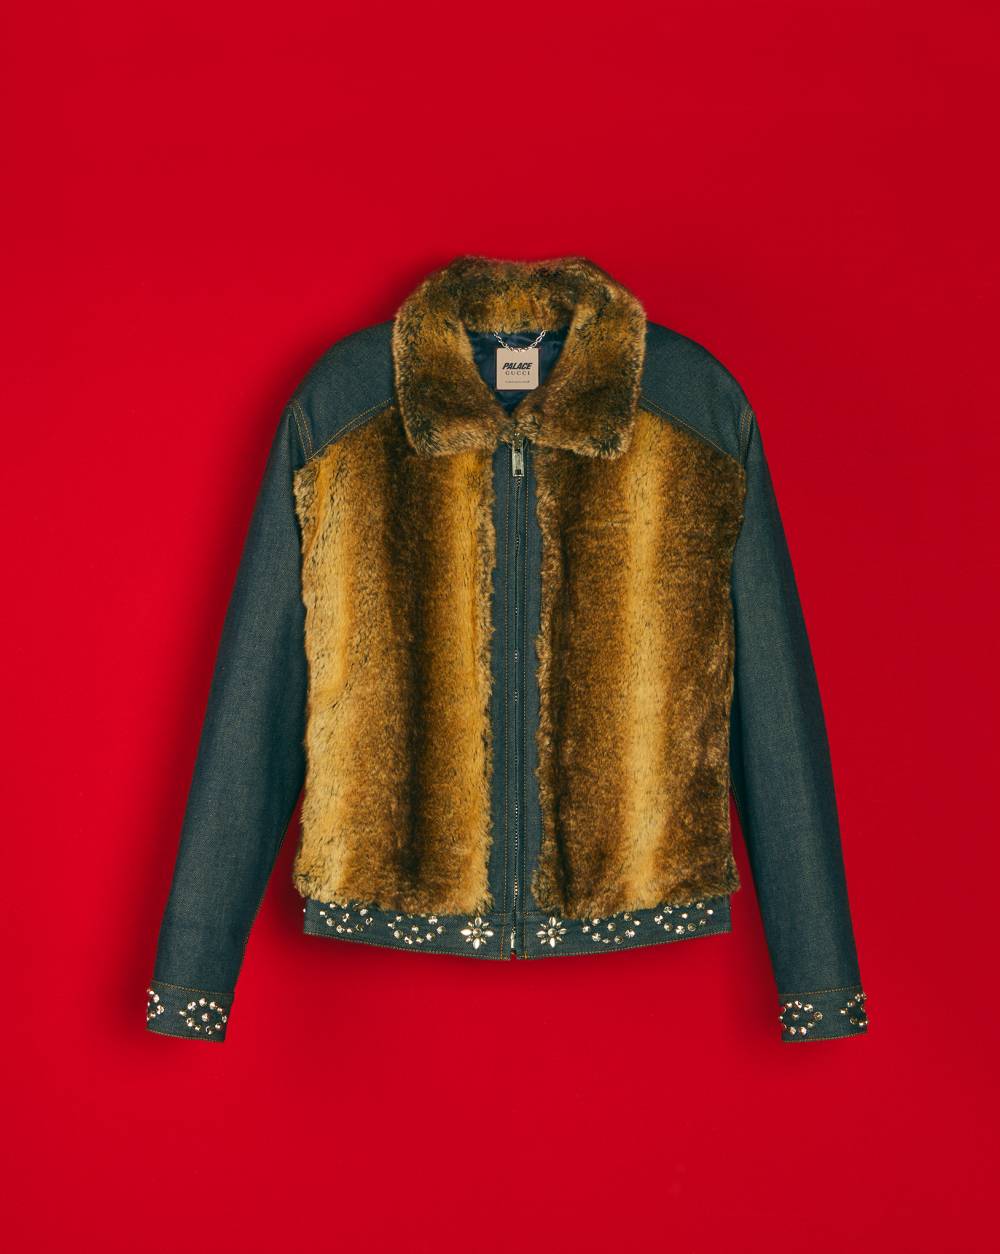 Denim jacket with faux fur, crystals and studs details by Palace Gucci